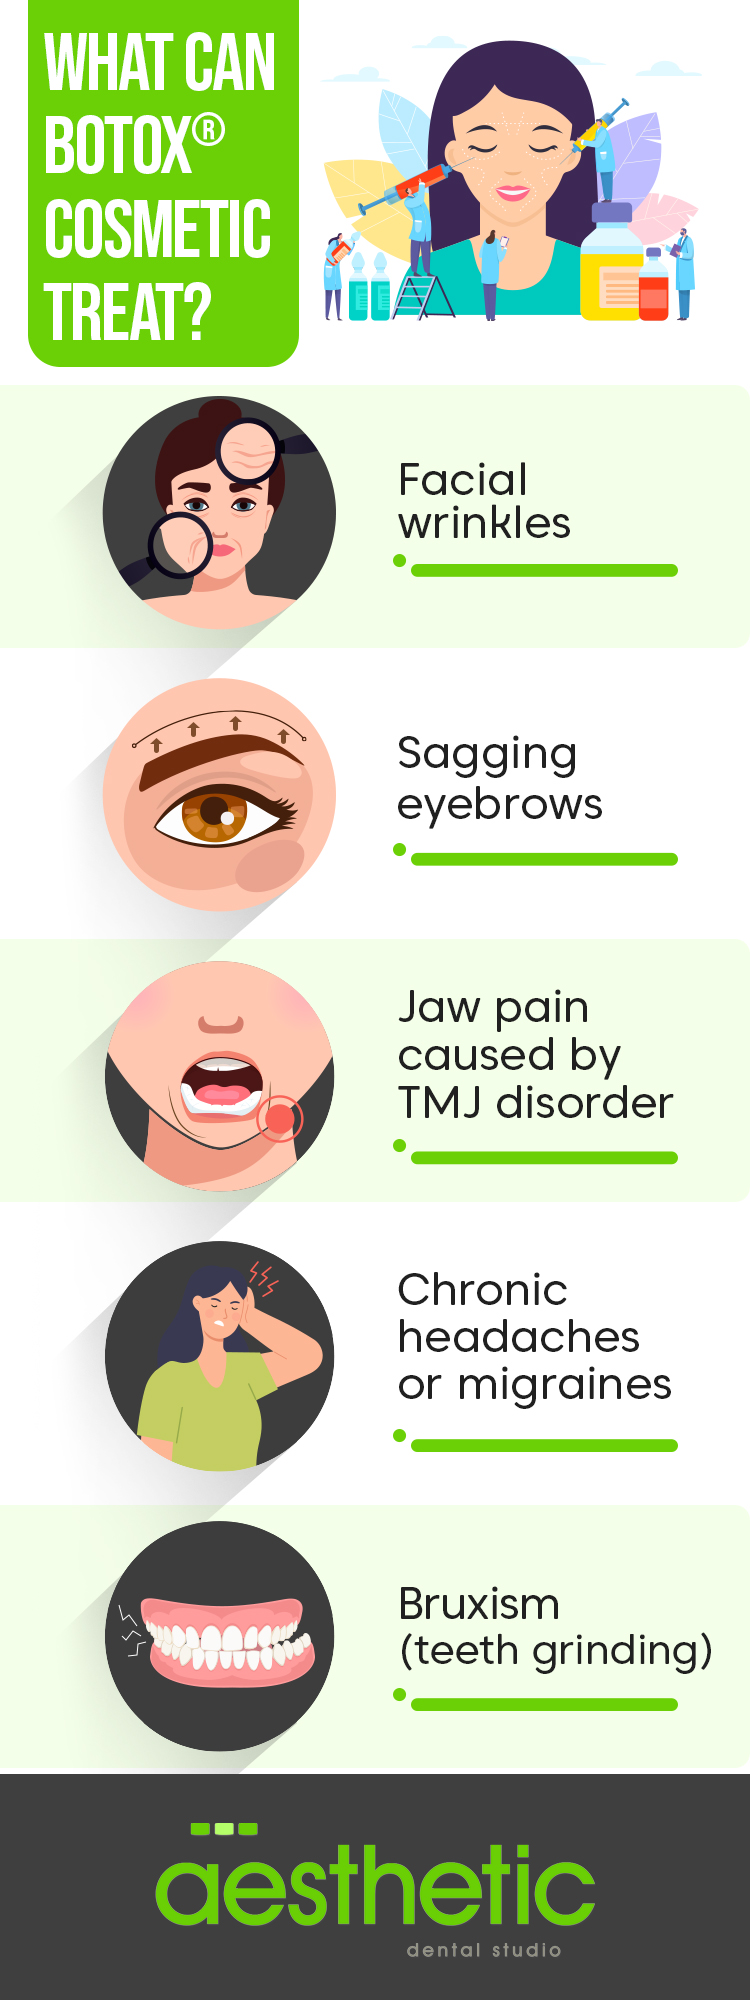 Common uses for dental BOTOX infographic including TMJ disorder and bruxism